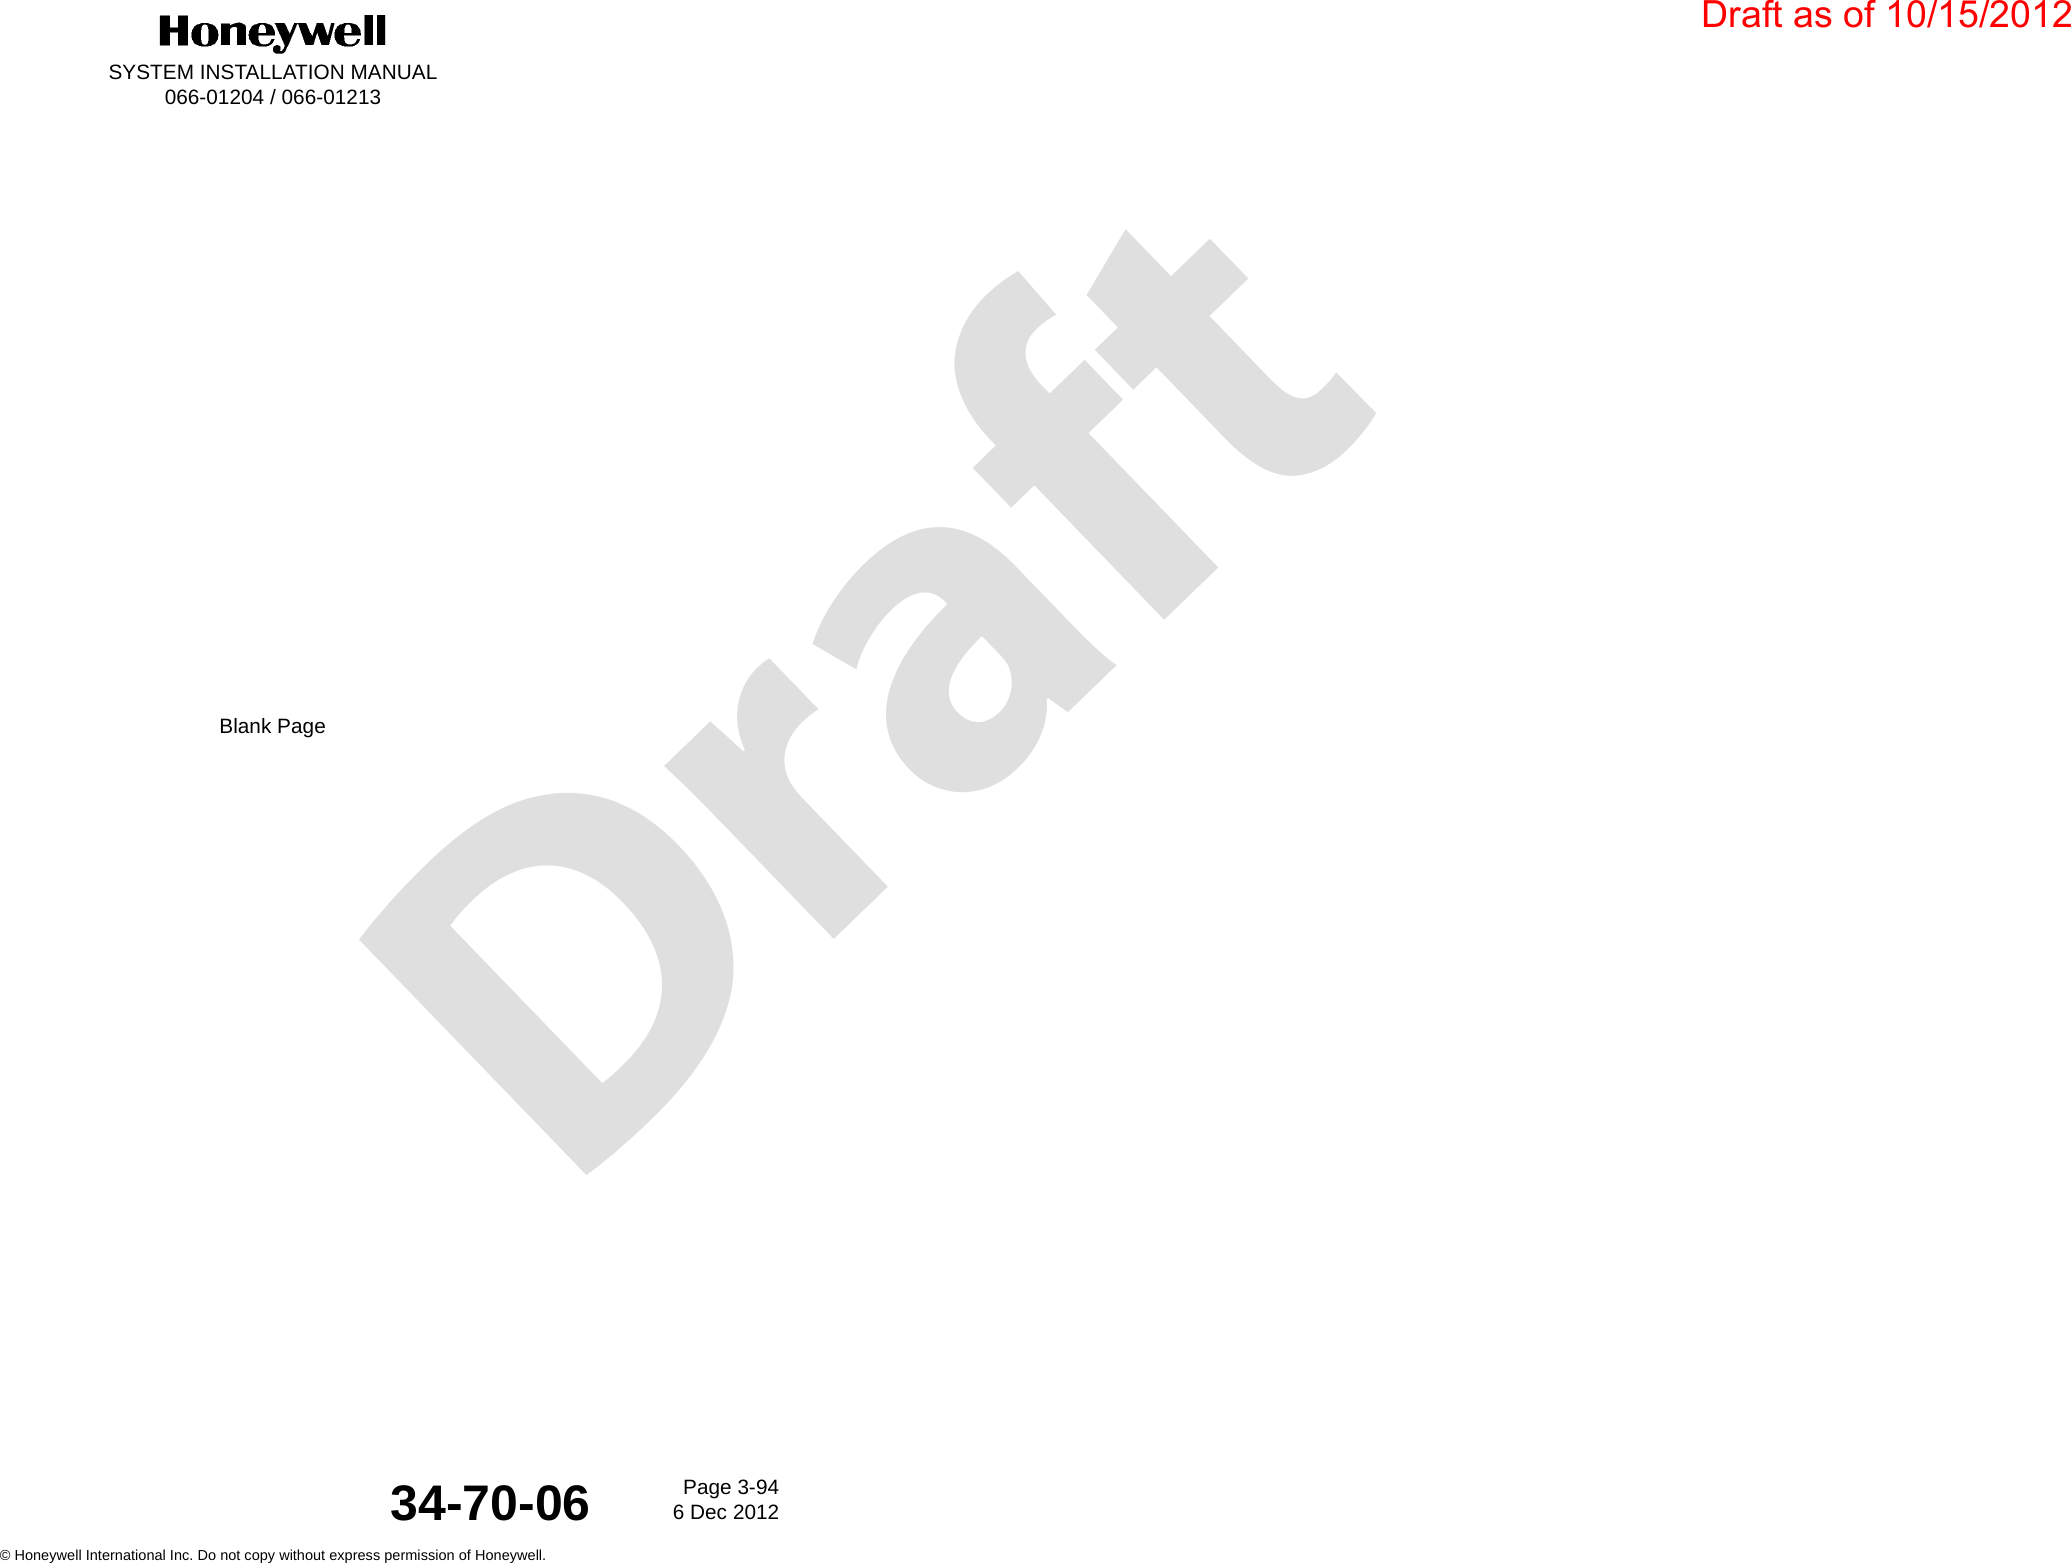 DraftSYSTEM INSTALLATION MANUAL066-01204 / 066-01213Page 3-946 Dec 2012© Honeywell International Inc. Do not copy without express permission of Honeywell.34-70-06Blank PageDraft as of 10/15/2012